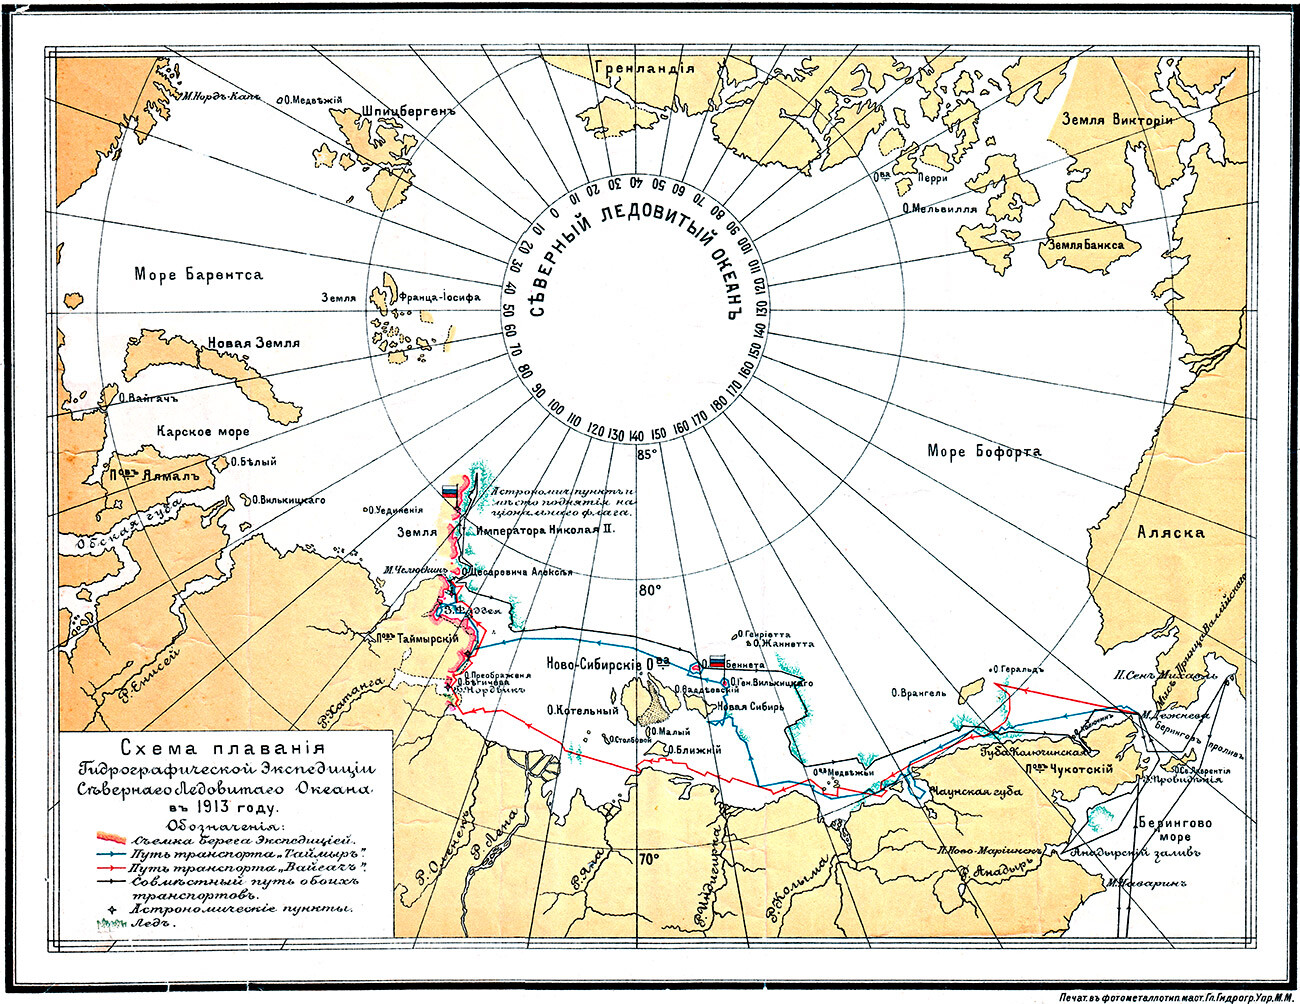 The route of the voyage of the Hydrographic Expedition of the Arctic Ocean in 1913.